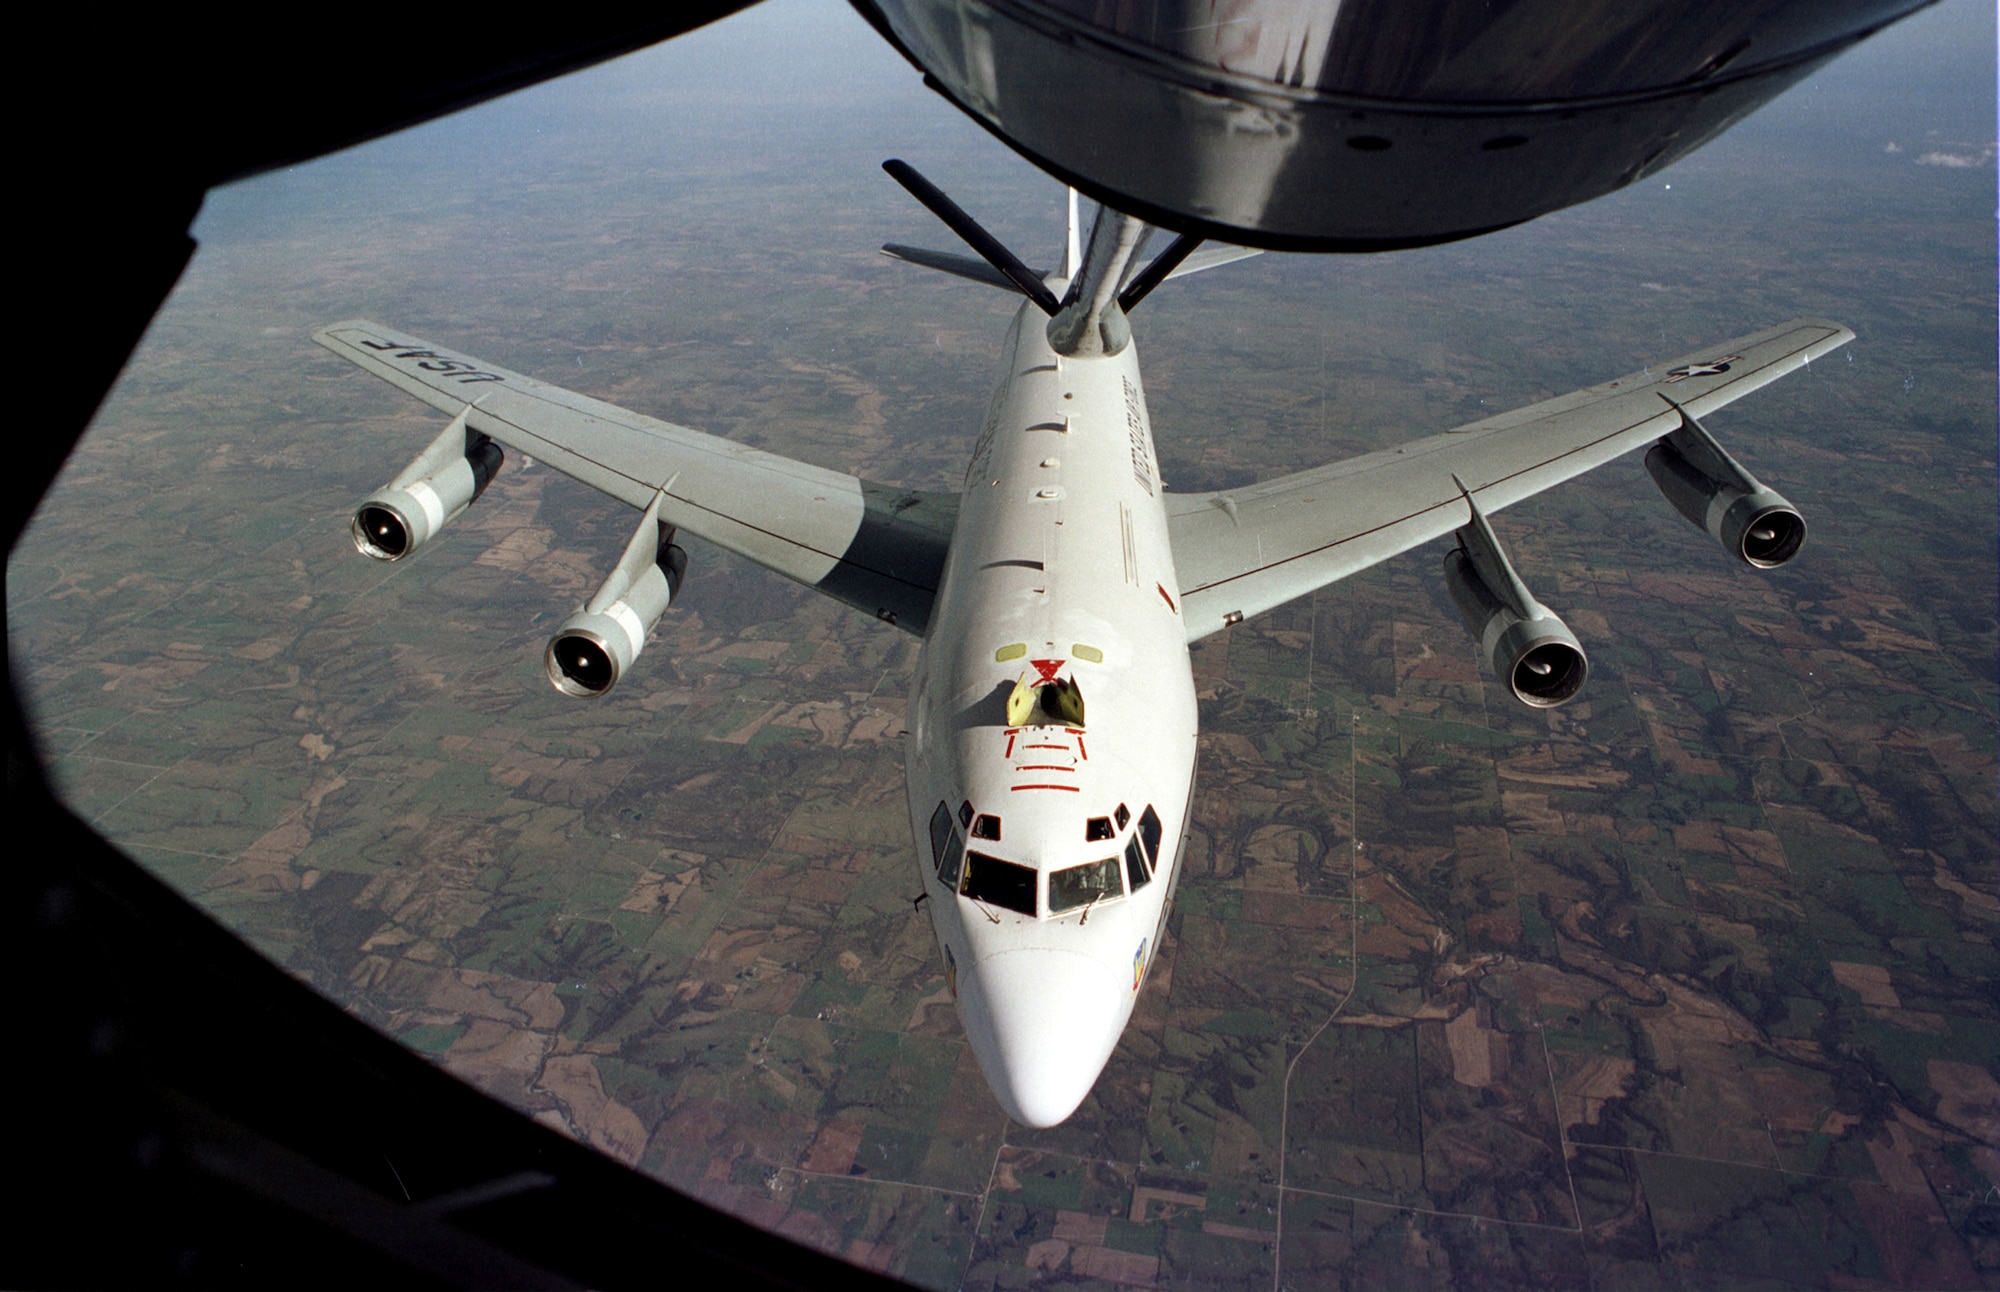 FILE PHOTO -- The WC-135W Constant Phoenix aircraft collects particulate and gaseous debris from the accessible regions of the atmosphere in support of the Limited Nuclear Test Ban Treaty of 1963. (U.S. Air Force photo)